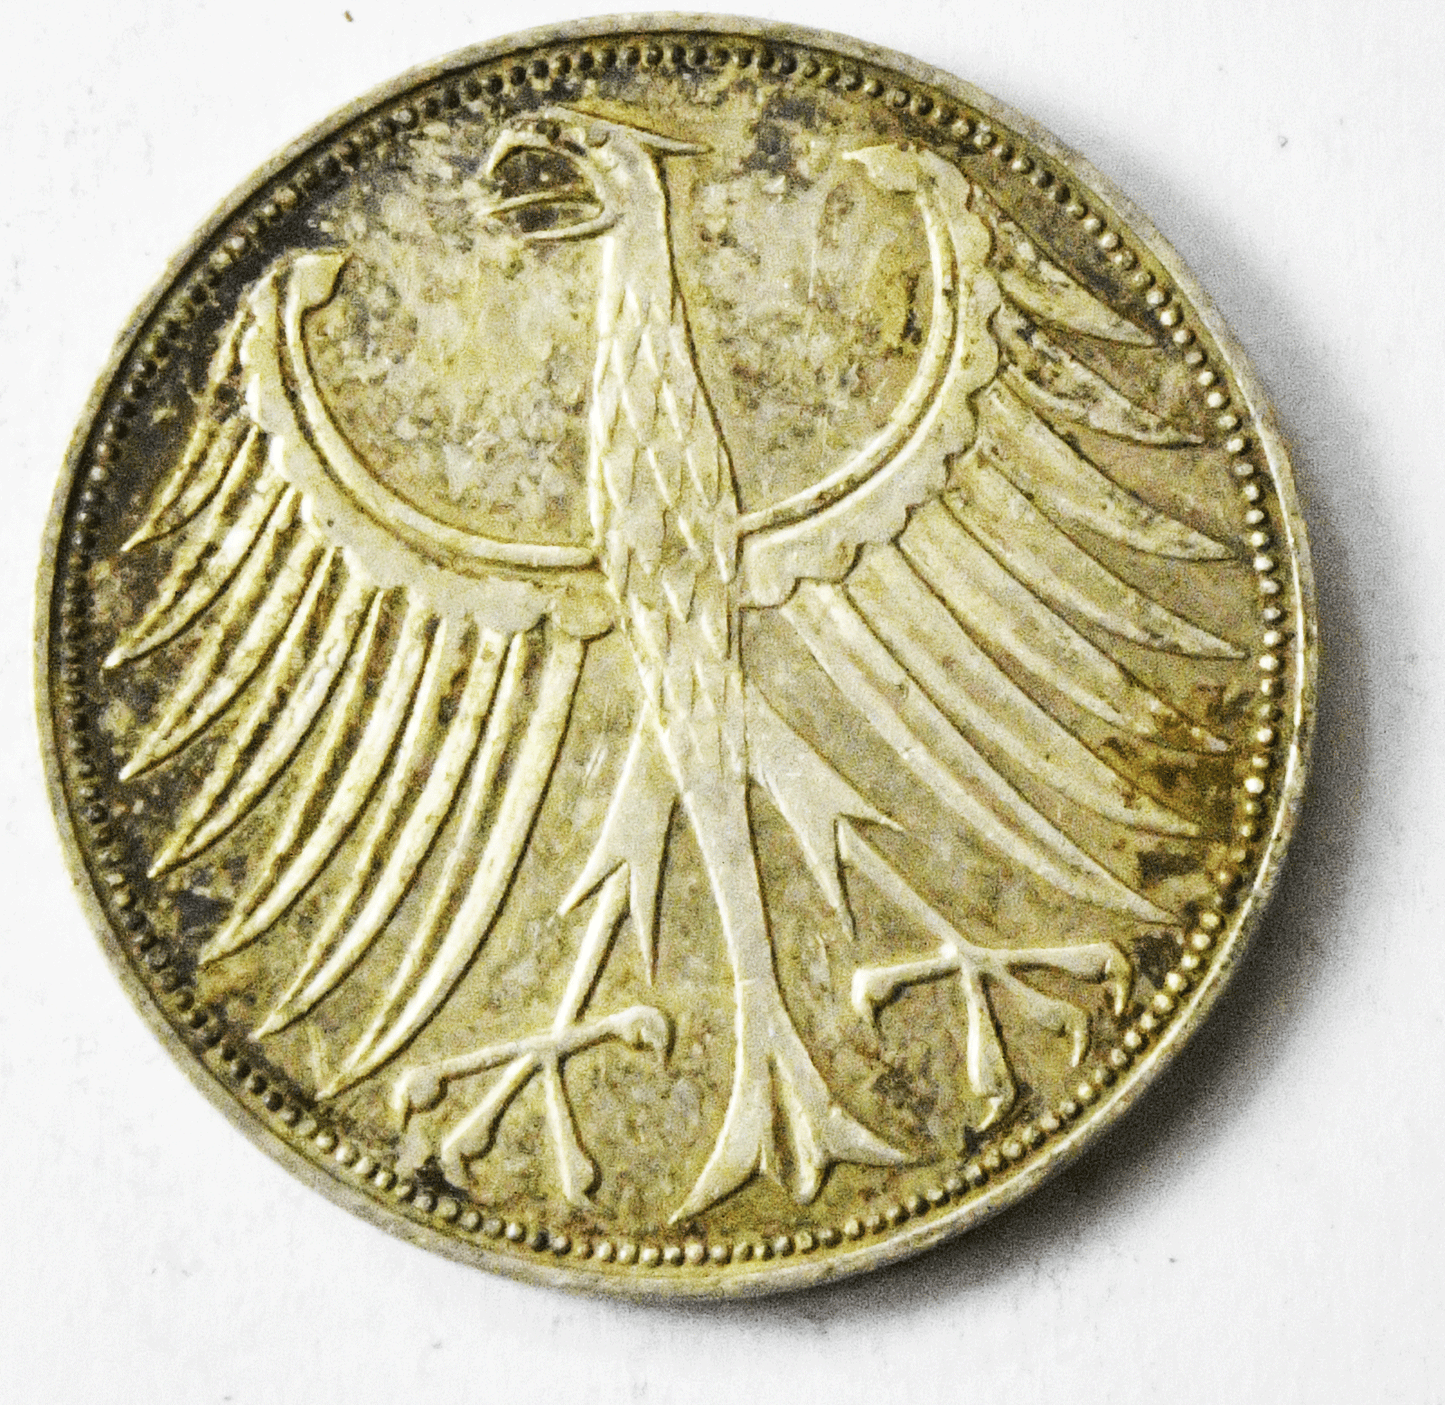 1969 D Germany Federal Republic 5 Five Mark Silver Coin KM# 112.1